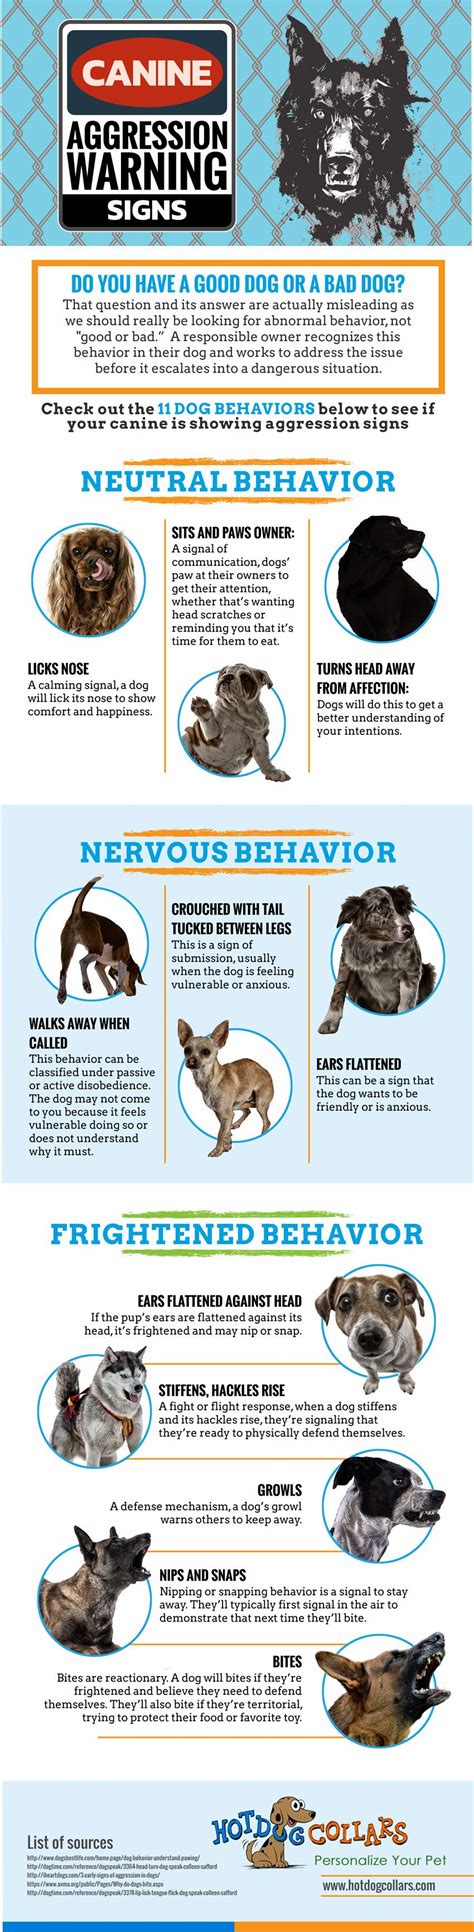 Be On The Look Out For Canine Aggression Warning Signs